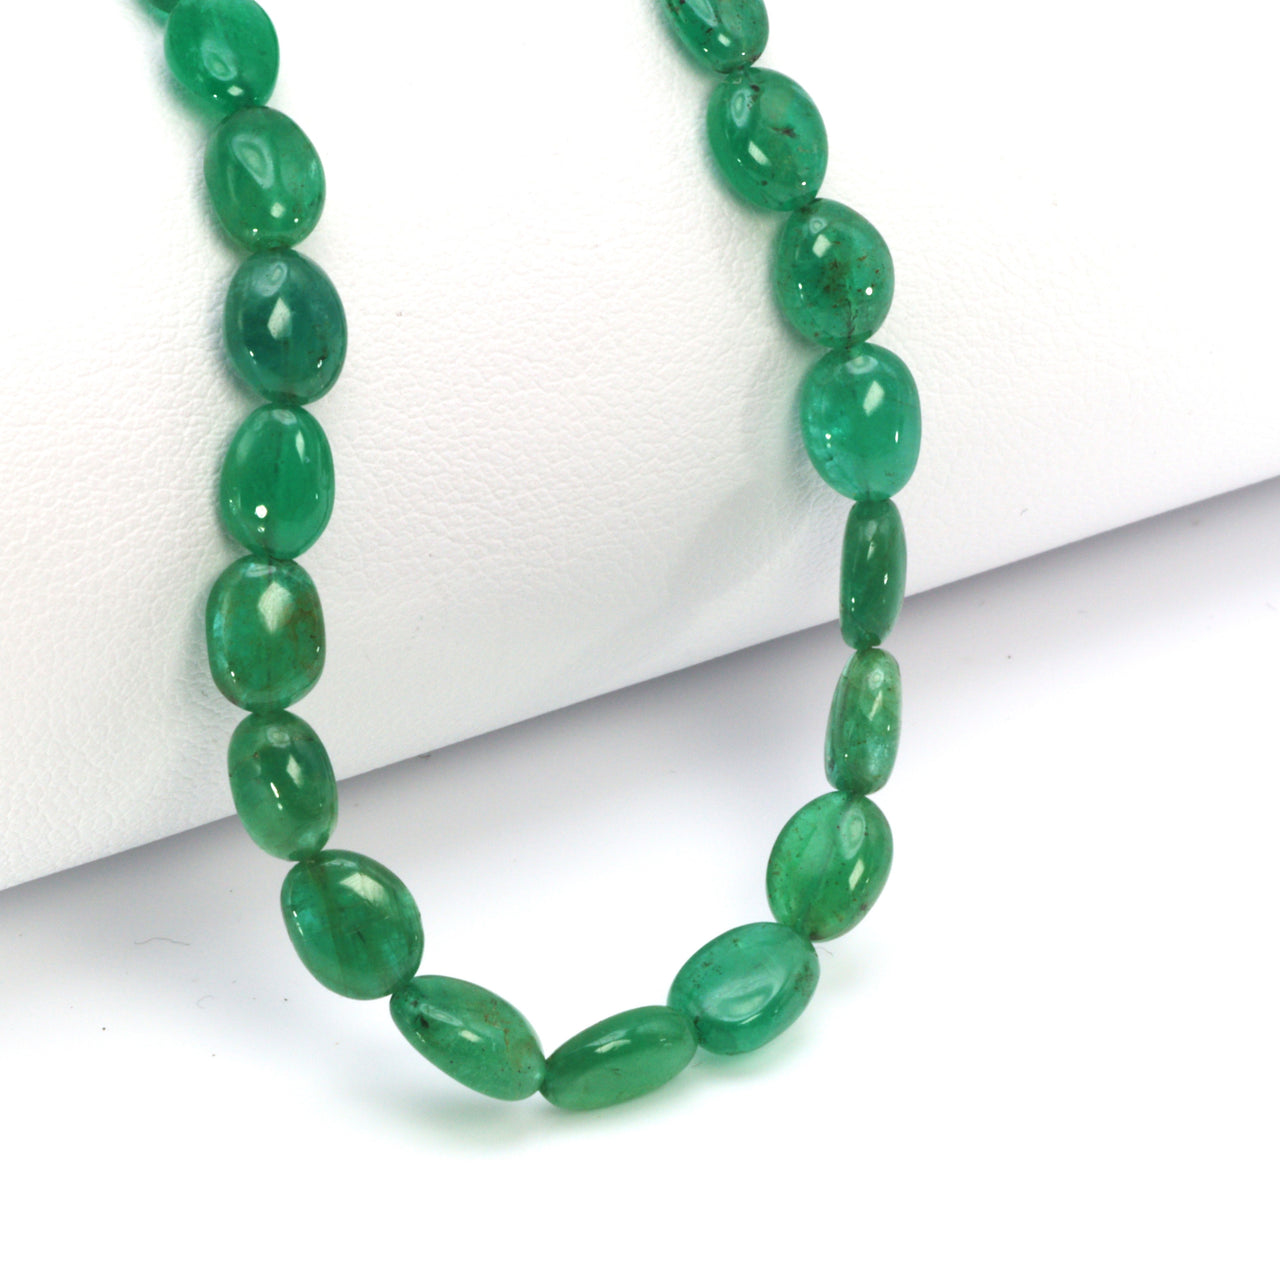 Green Emerald 6x4mm Smooth Ovals